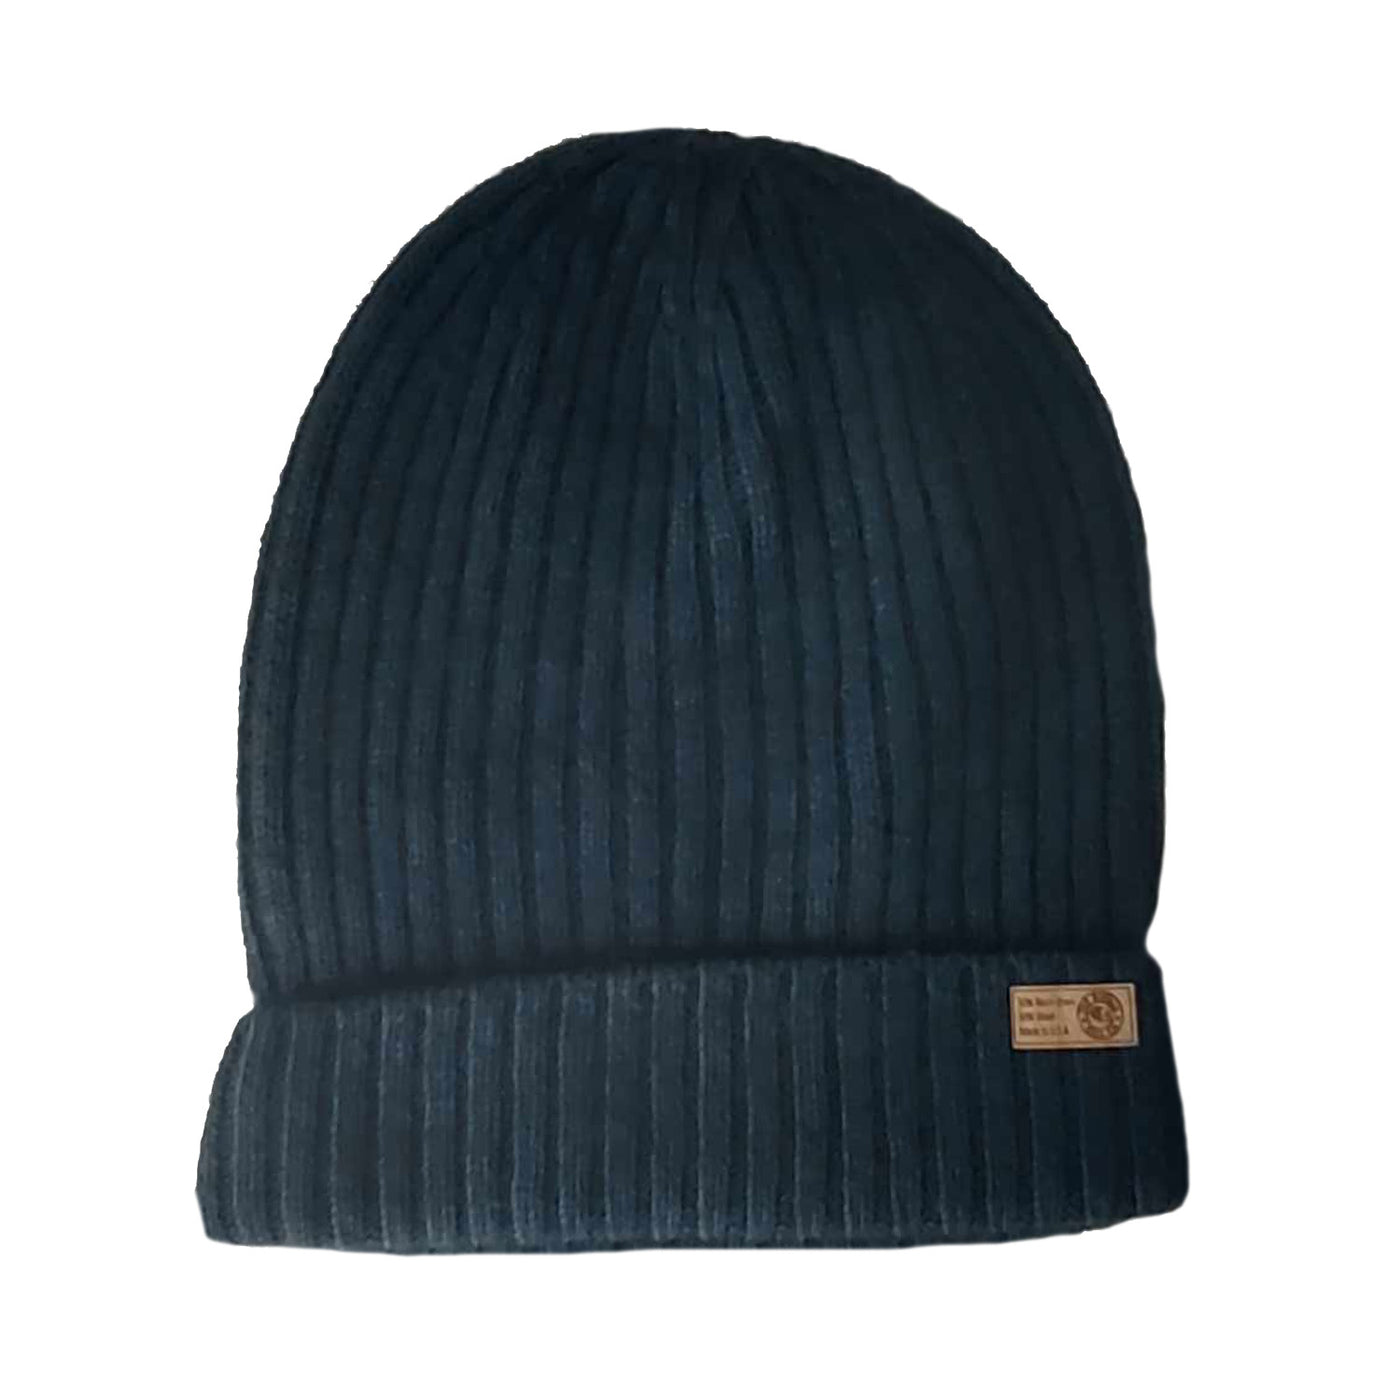 Really Really Nice Bison Beanie